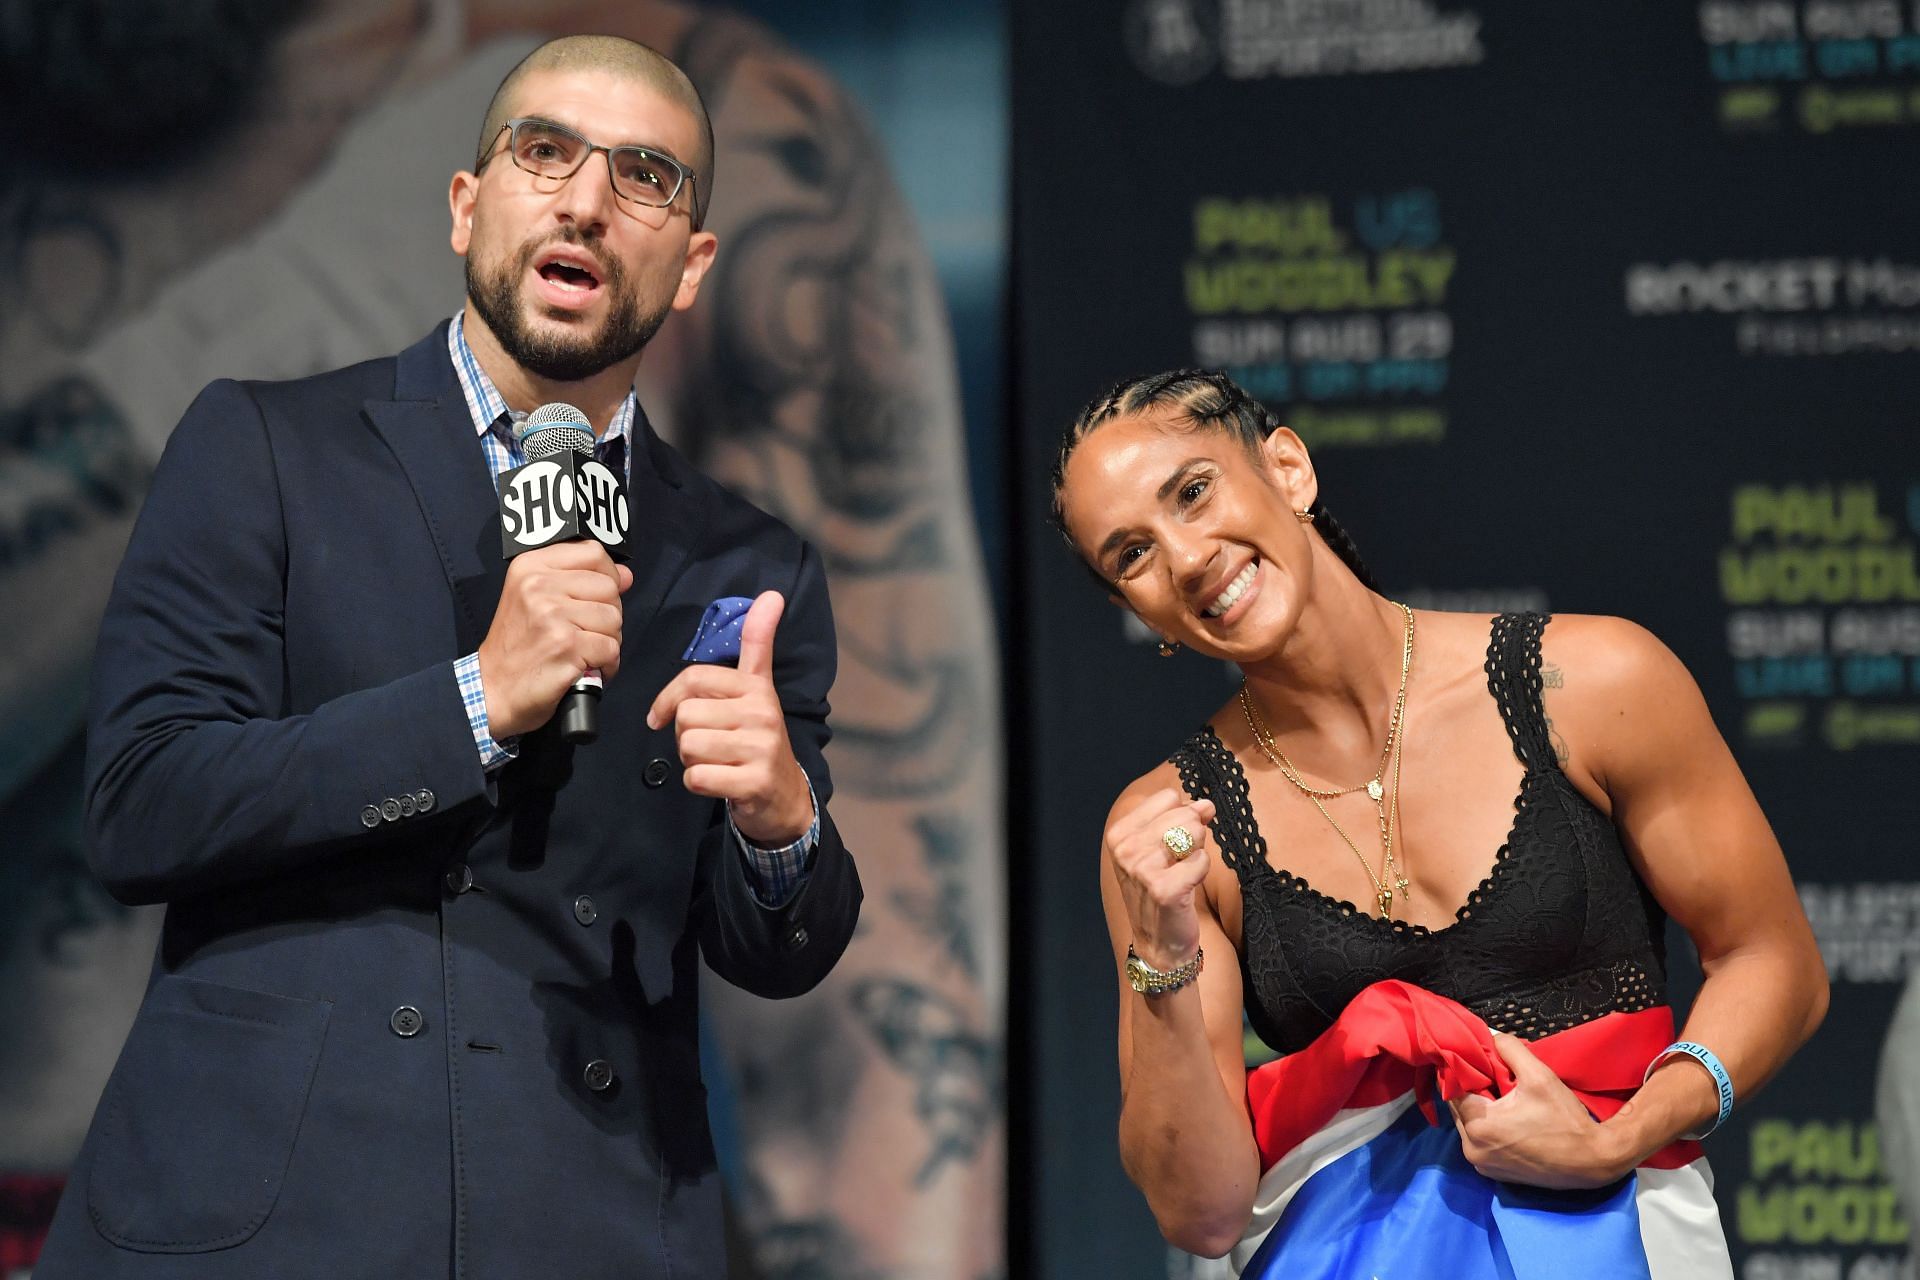 Ariel Helwani (left) with Amanda Serrano (right) at the Jake Paul vs. Tyron Woodley Weigh In (Image via Getty)